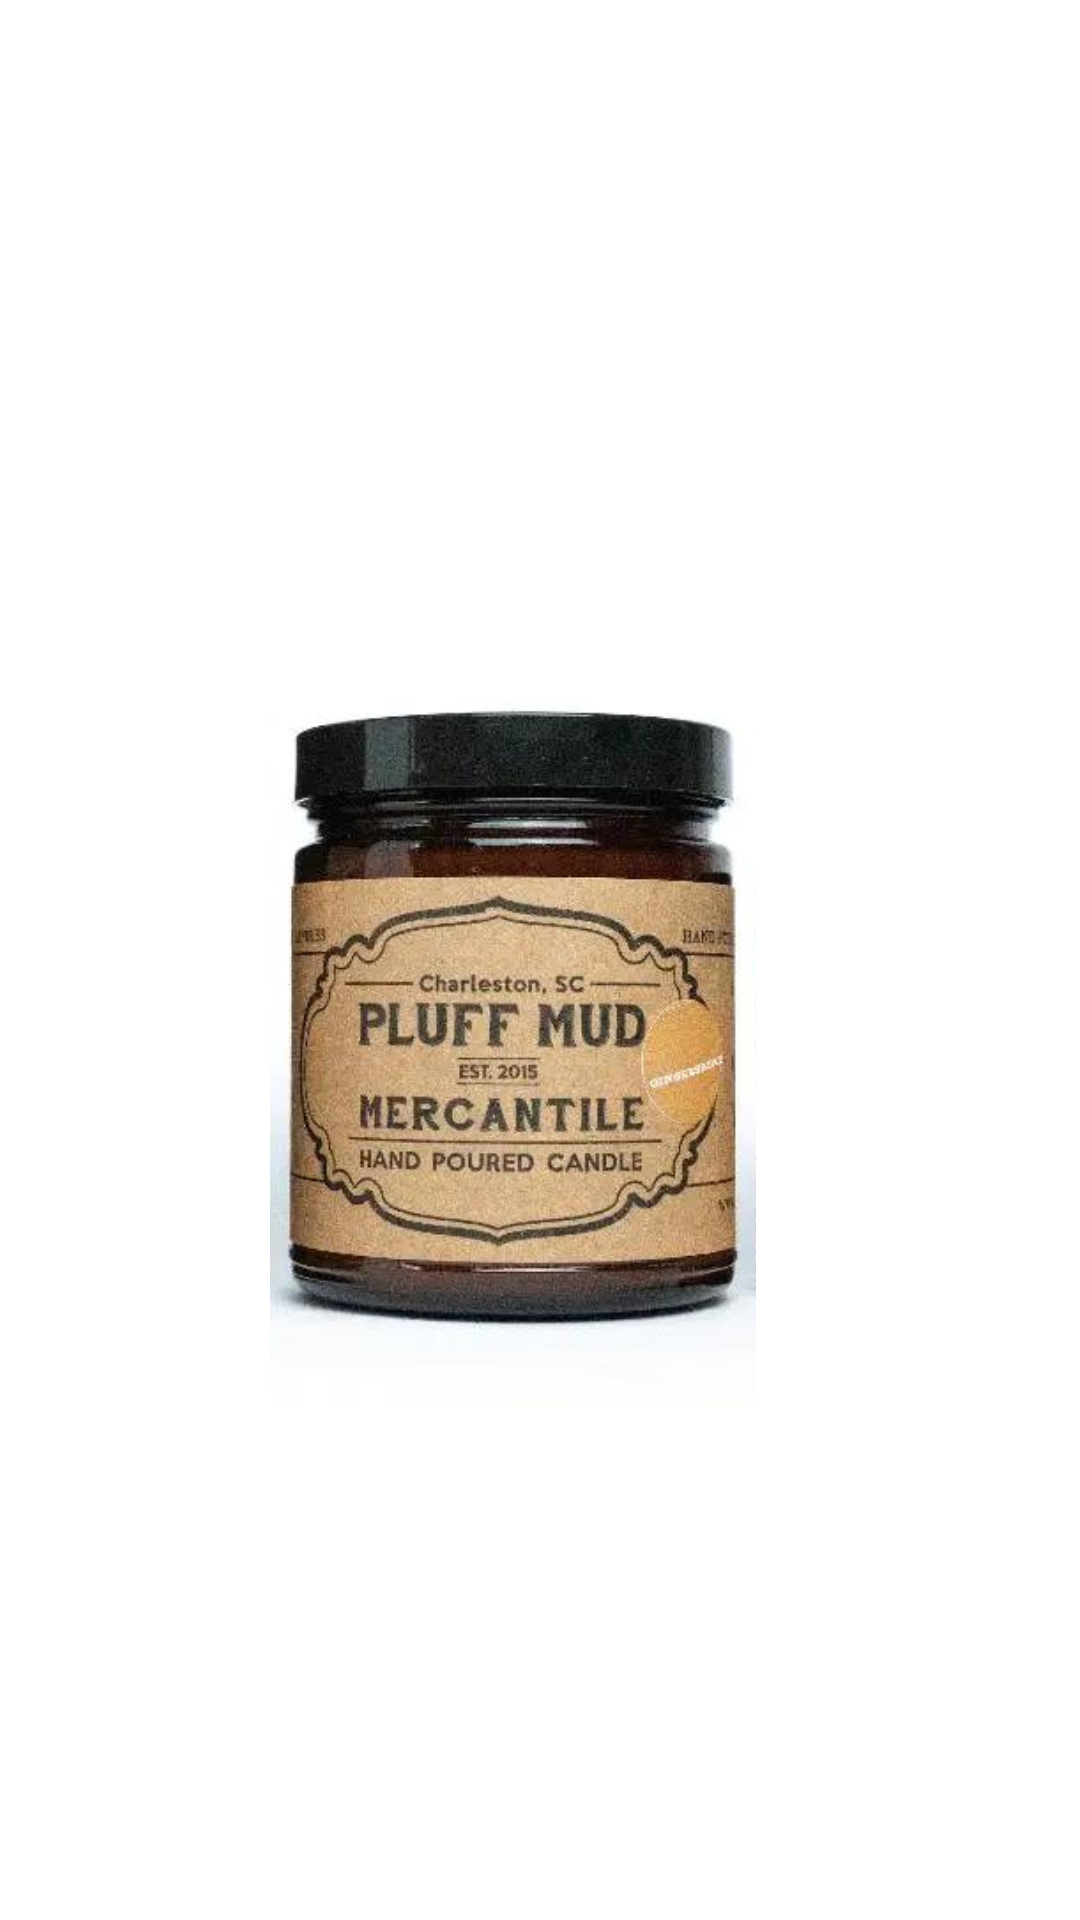 Pluff Mud Hand Poured Soy Candle - Pluff Mud Mercantile